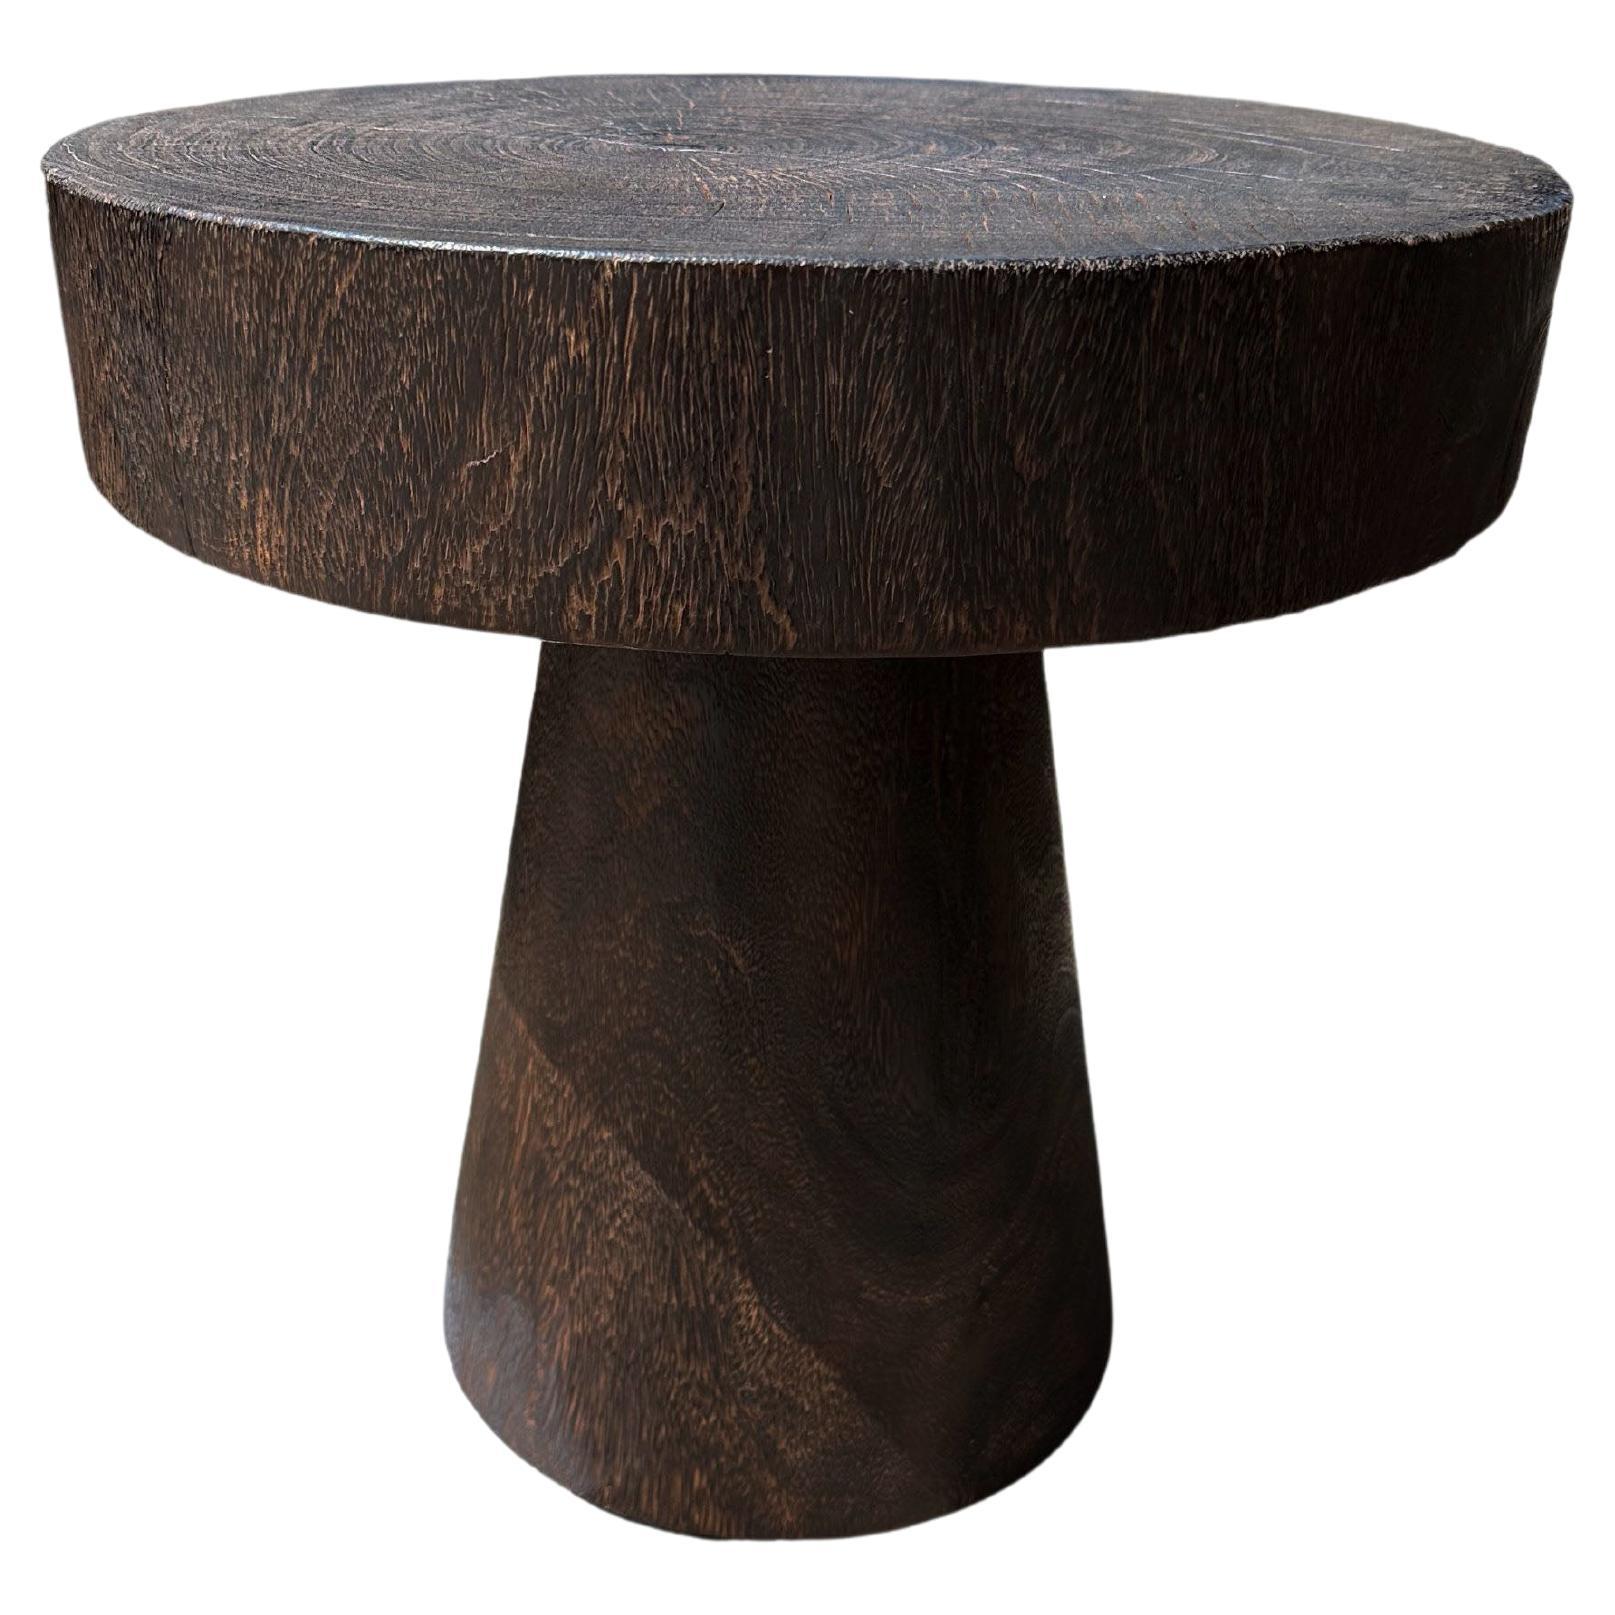 Sculptural Round Table Crafted from Solid Suar Wood, Natural Finish